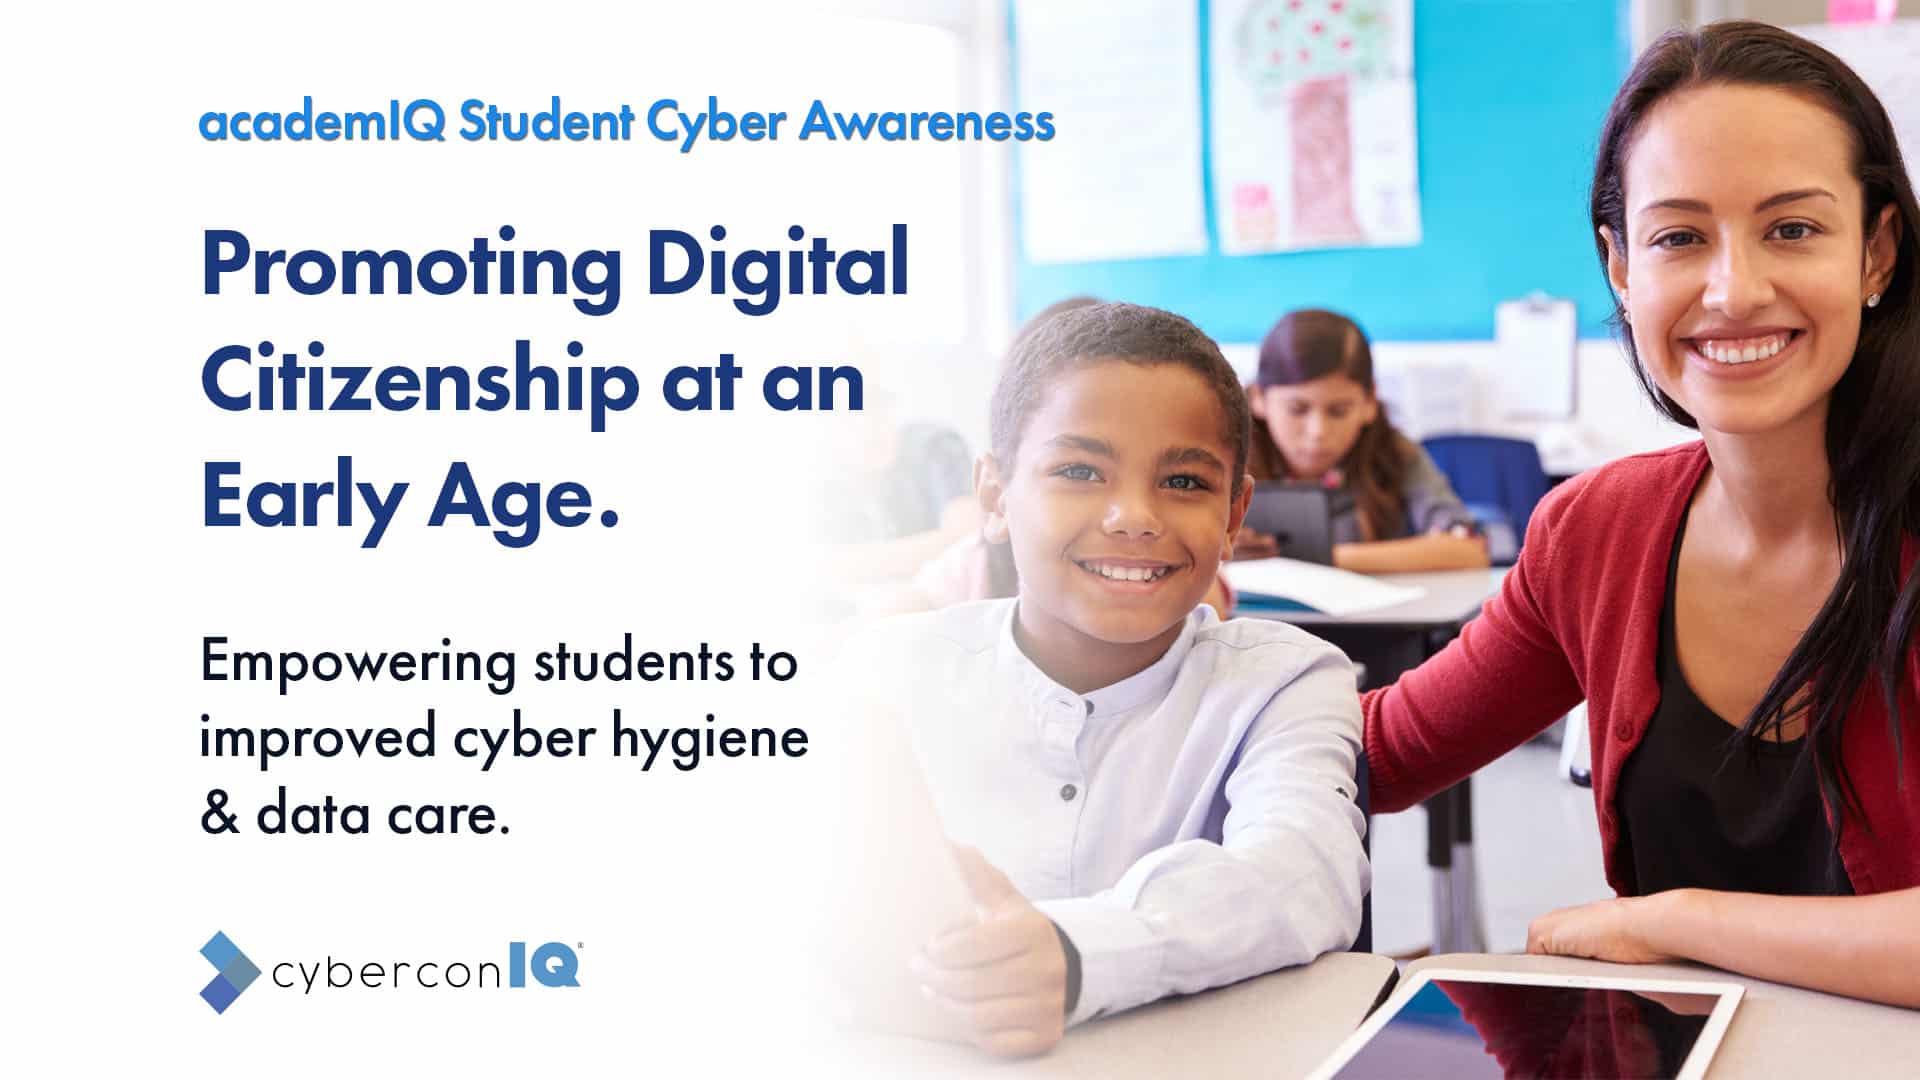 academIQ Student Cyber Awareness cover